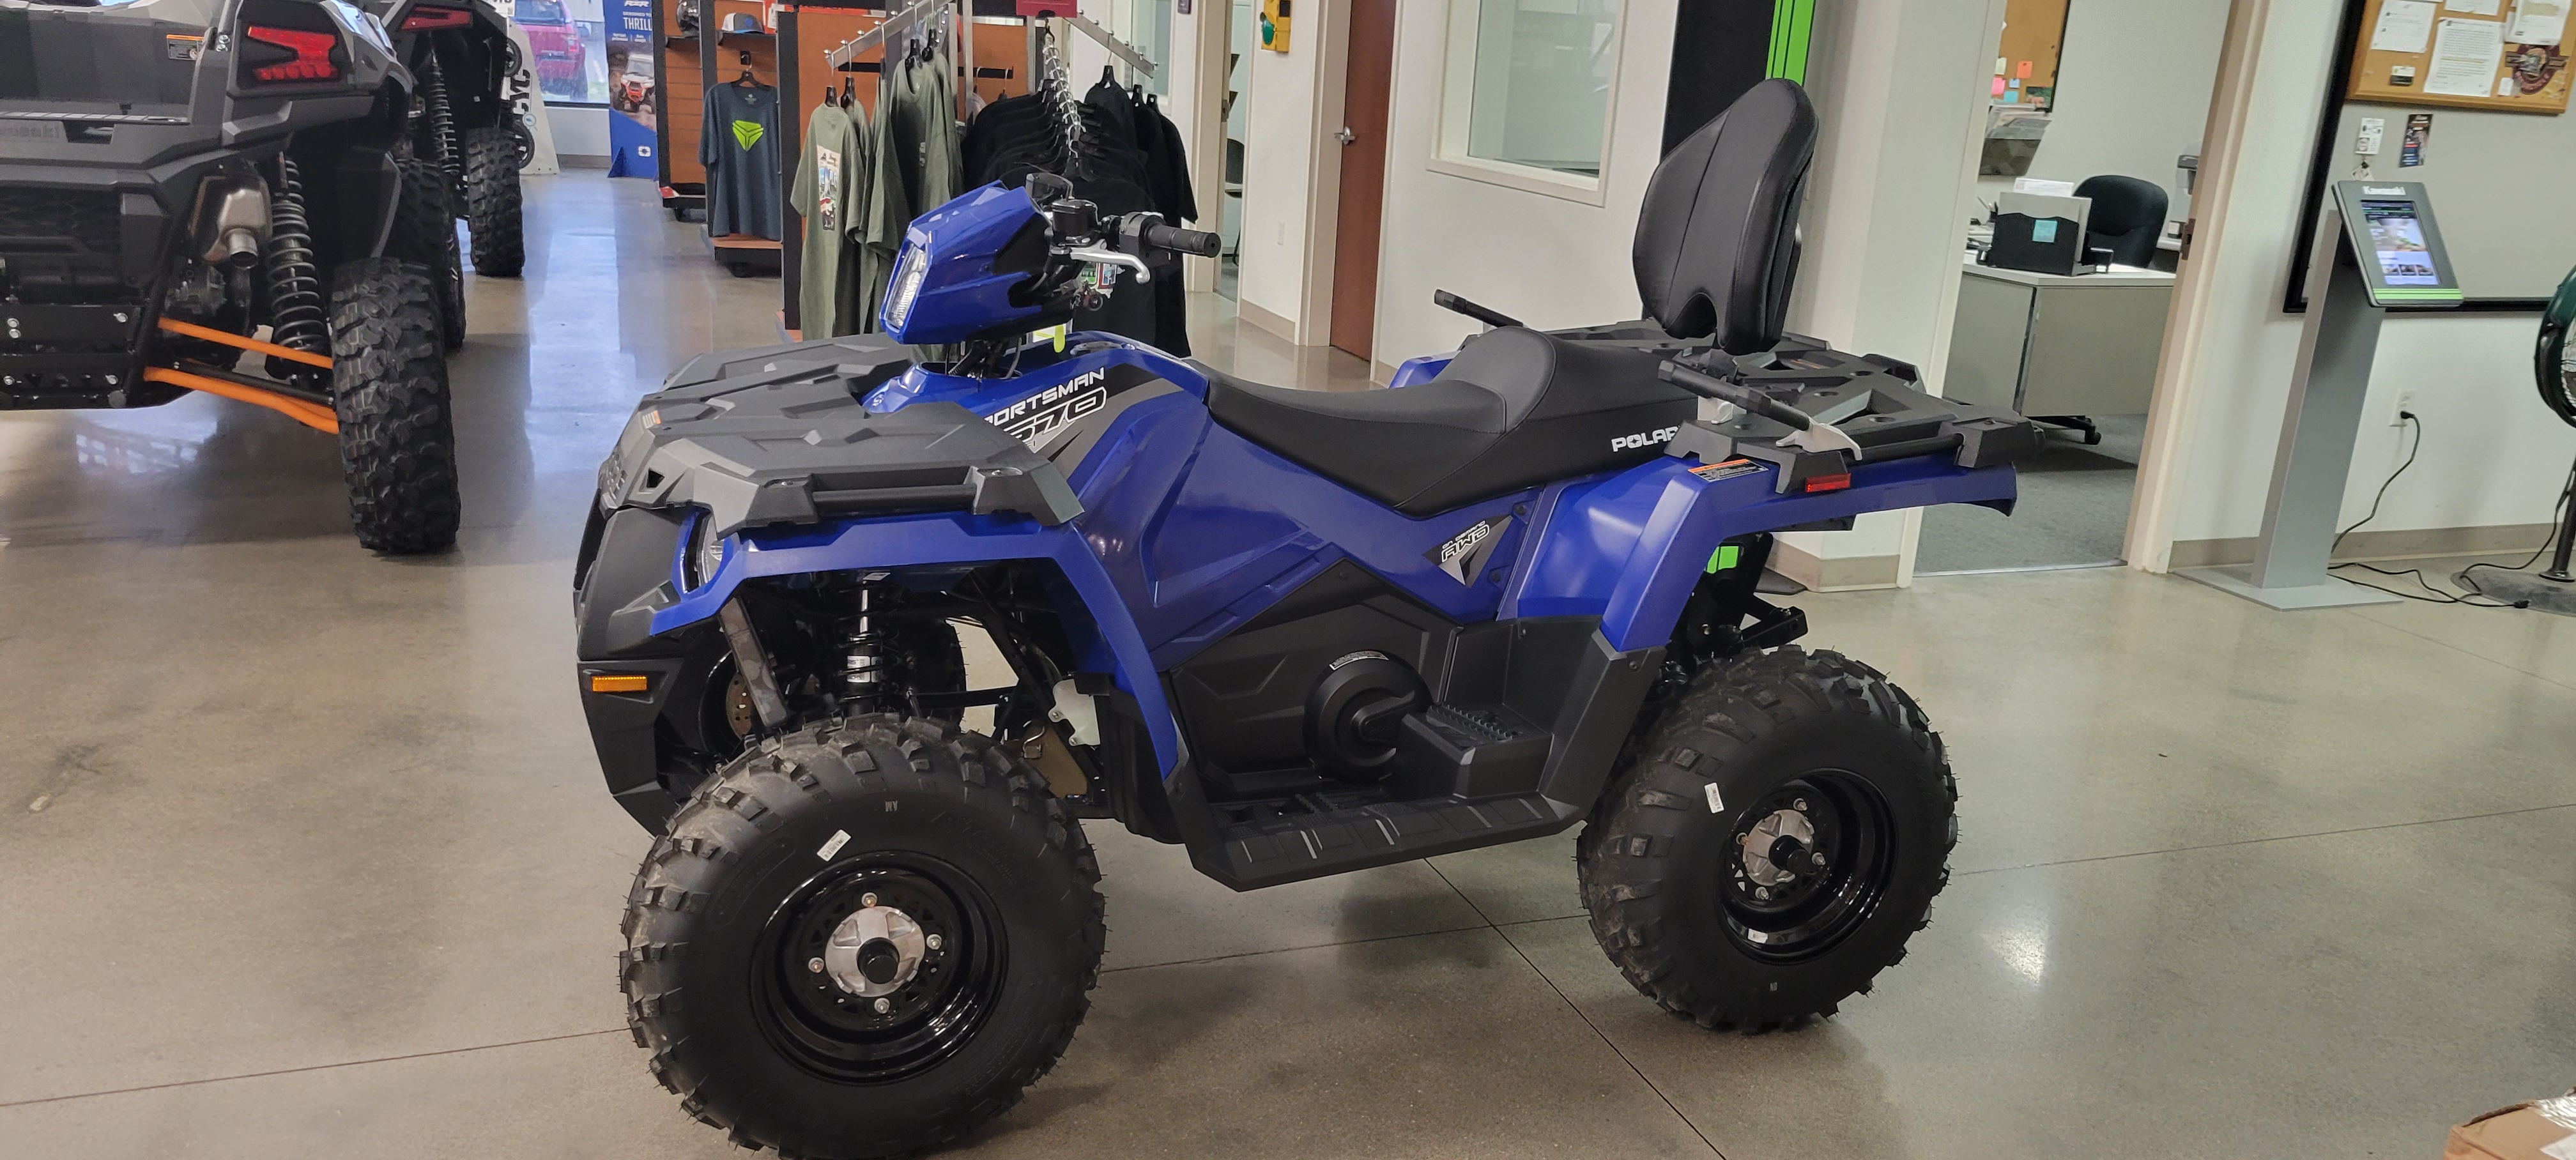 2022 Polaris Sportsman Touring 570 Base at Brenny's Motorcycle Clinic, Bettendorf, IA 52722